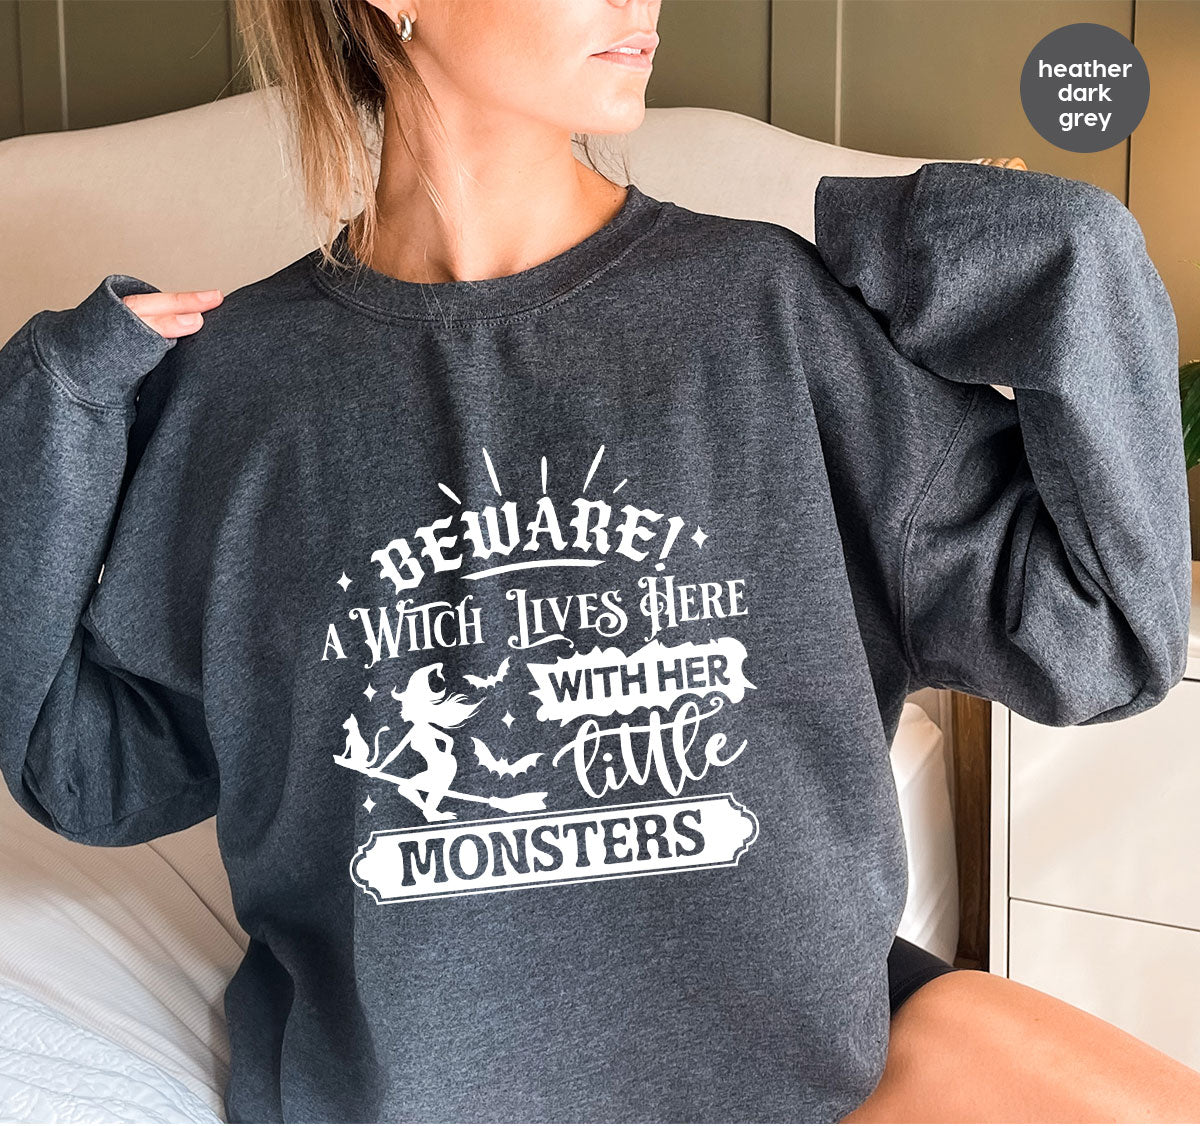 Spooky Season Shirts, Halloween Tshirts, Kids Graphic Tees, Hocus Pocus Vneck Clothing, Gift For Friend, Genderneutral Adult T-Shirt